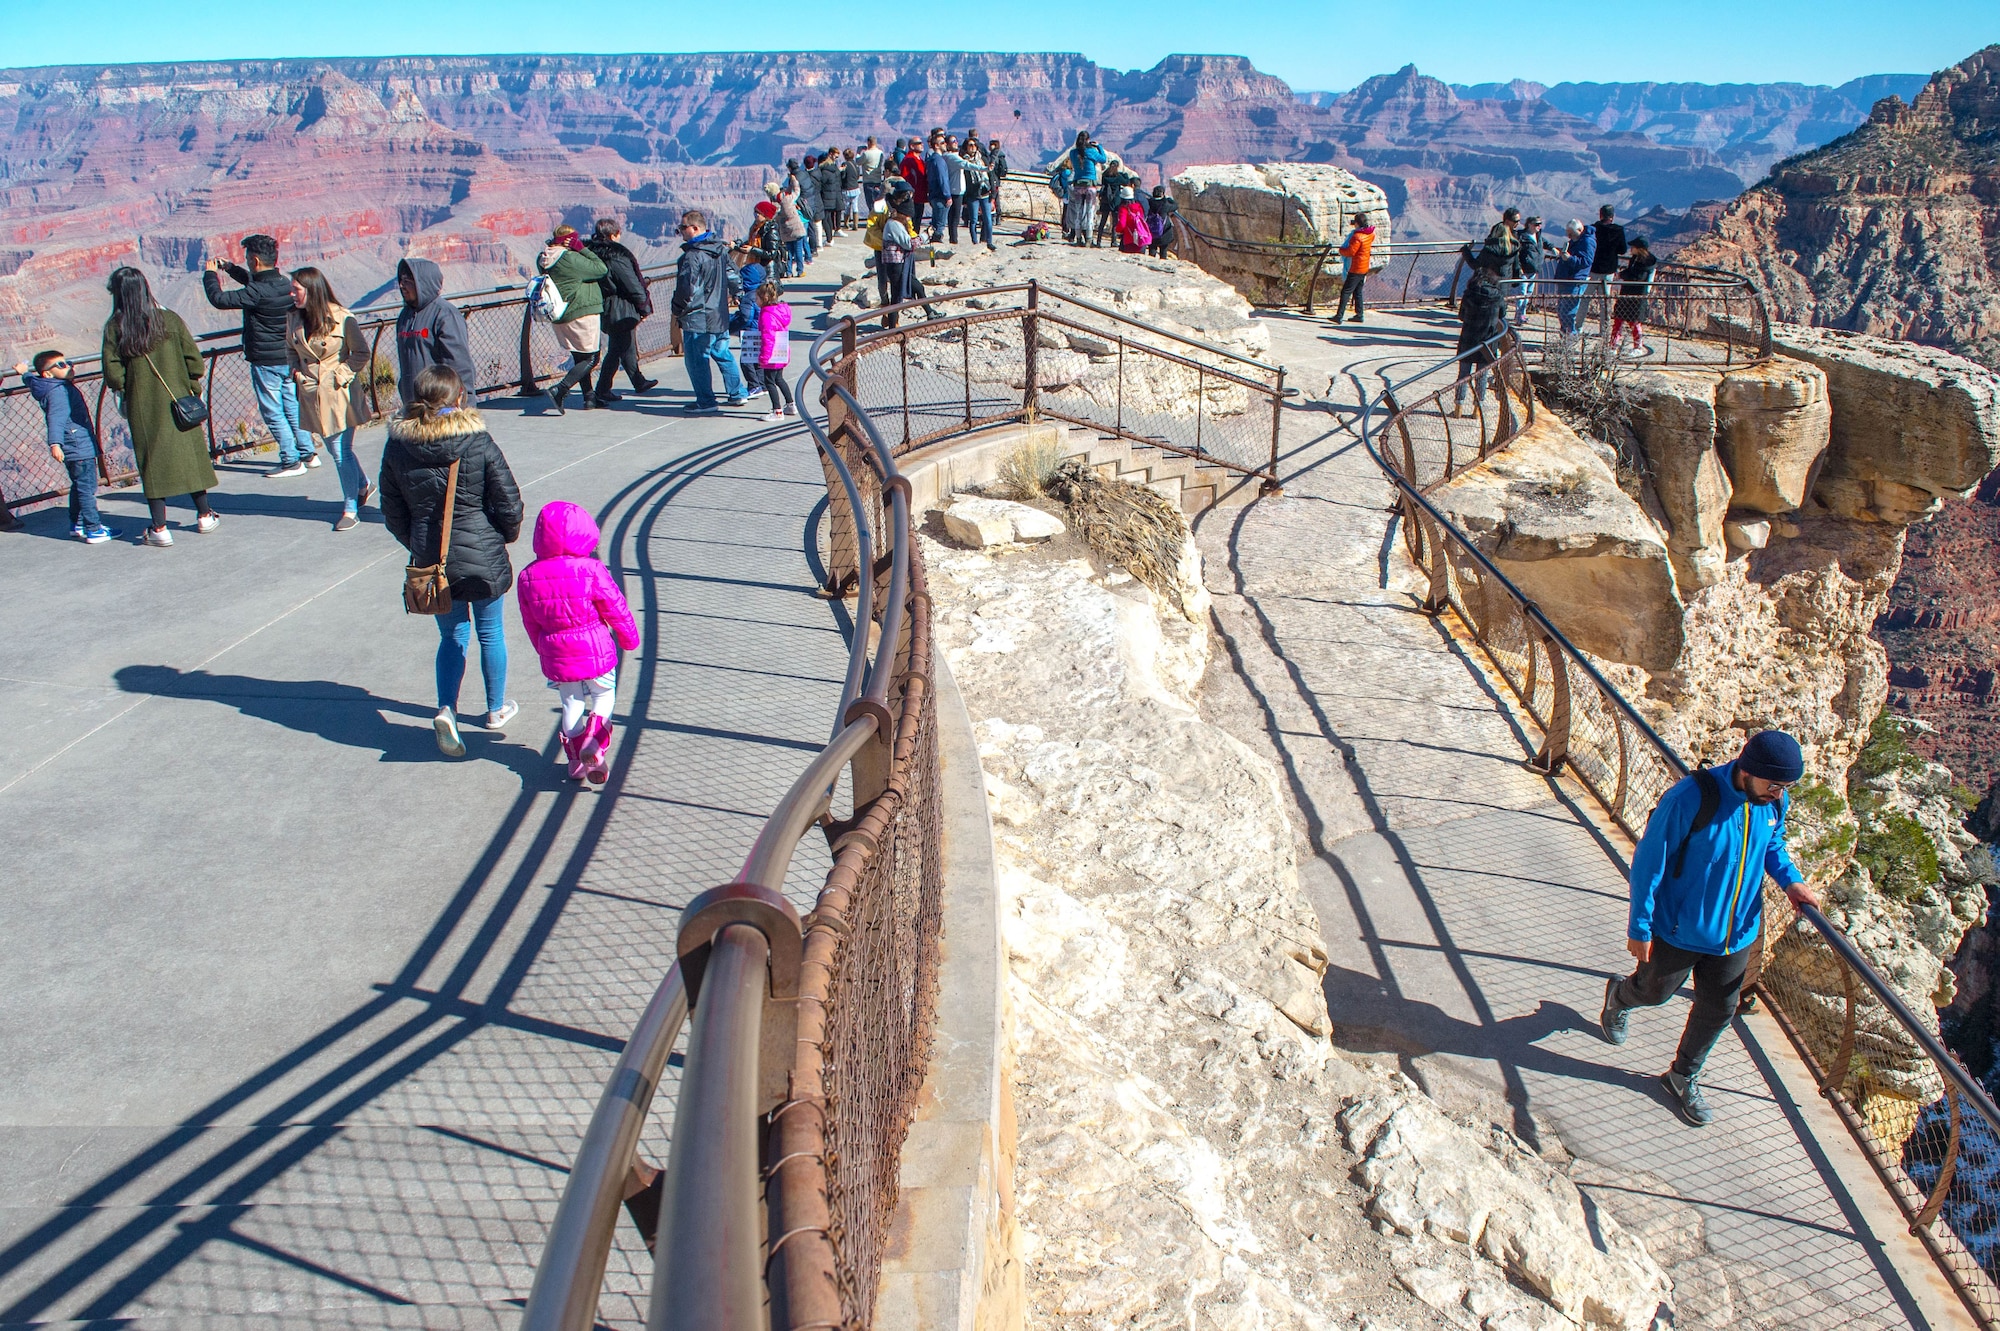 Visitors view the Grand Canyon from Mather Point at Grand Canyon National Park, Ariz., Jan. 27, 2018. The Grand Canyon is one of the most frequently visited destinations for Airmen stationed in Arizona. (U.S. Air Force photo/Airman 1st Class Caleb Worpel)